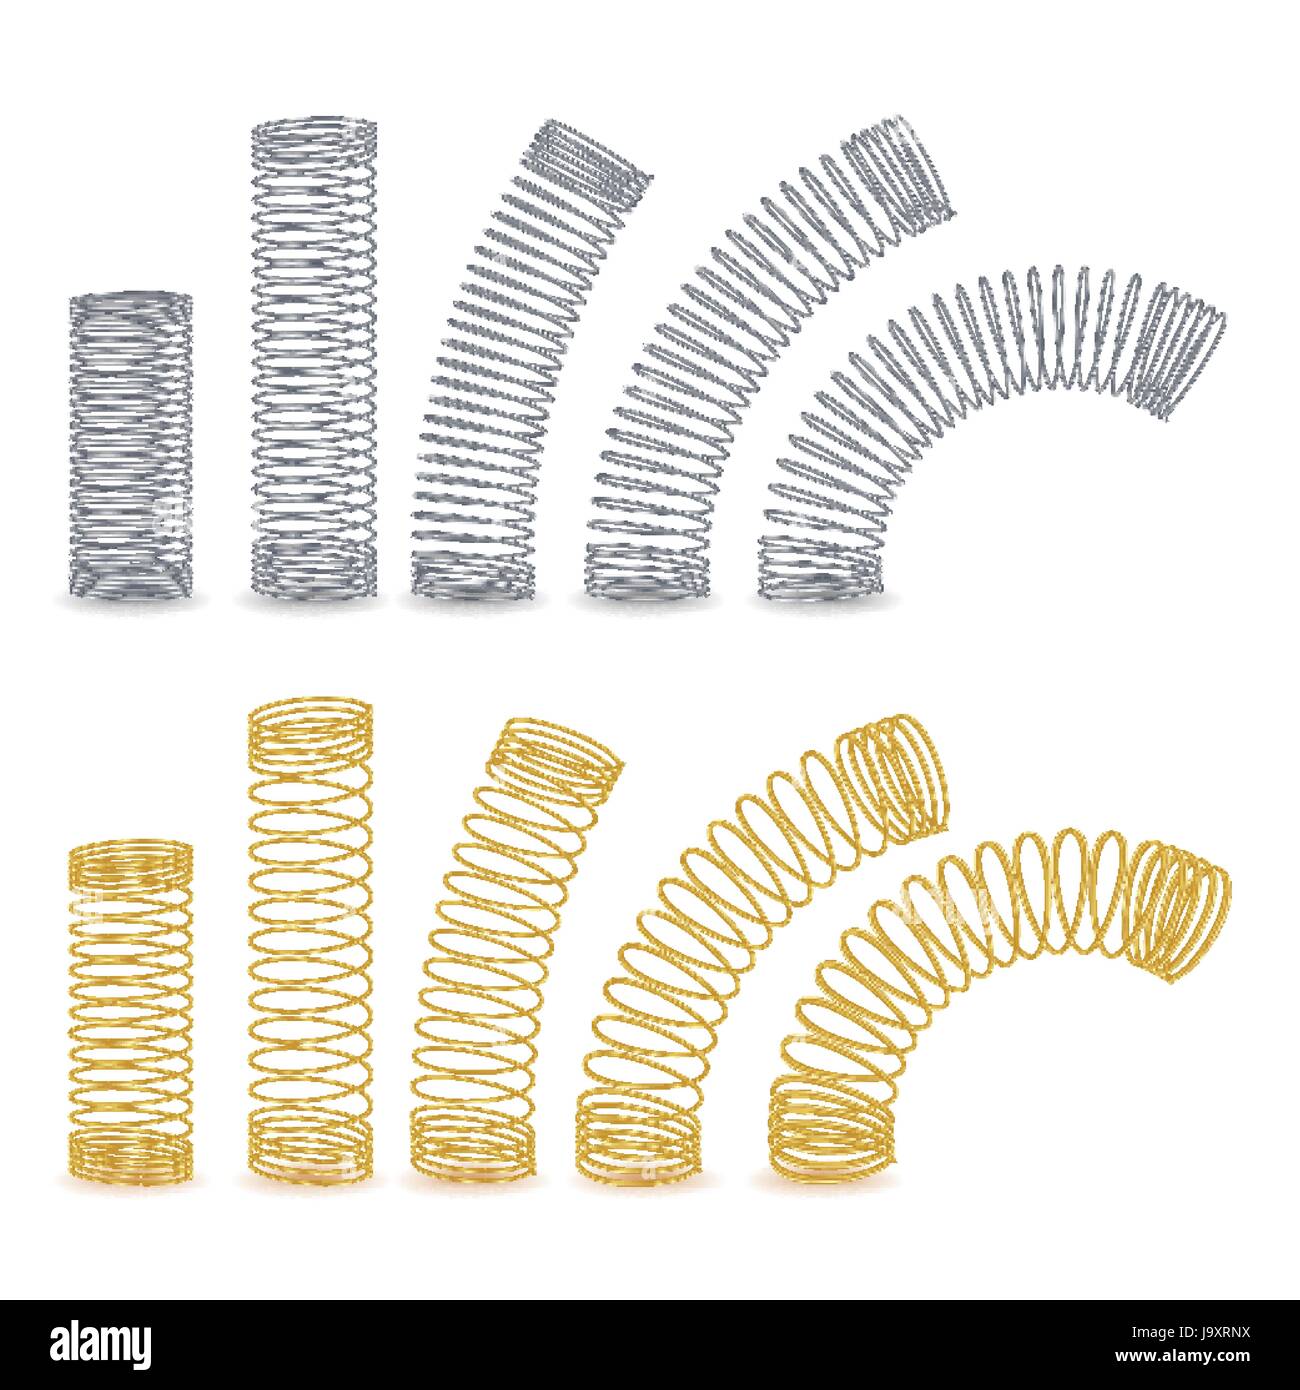 Spiral Flexible Wire. Springs Of Compression, Tension And Torsion. Set Stock Vector